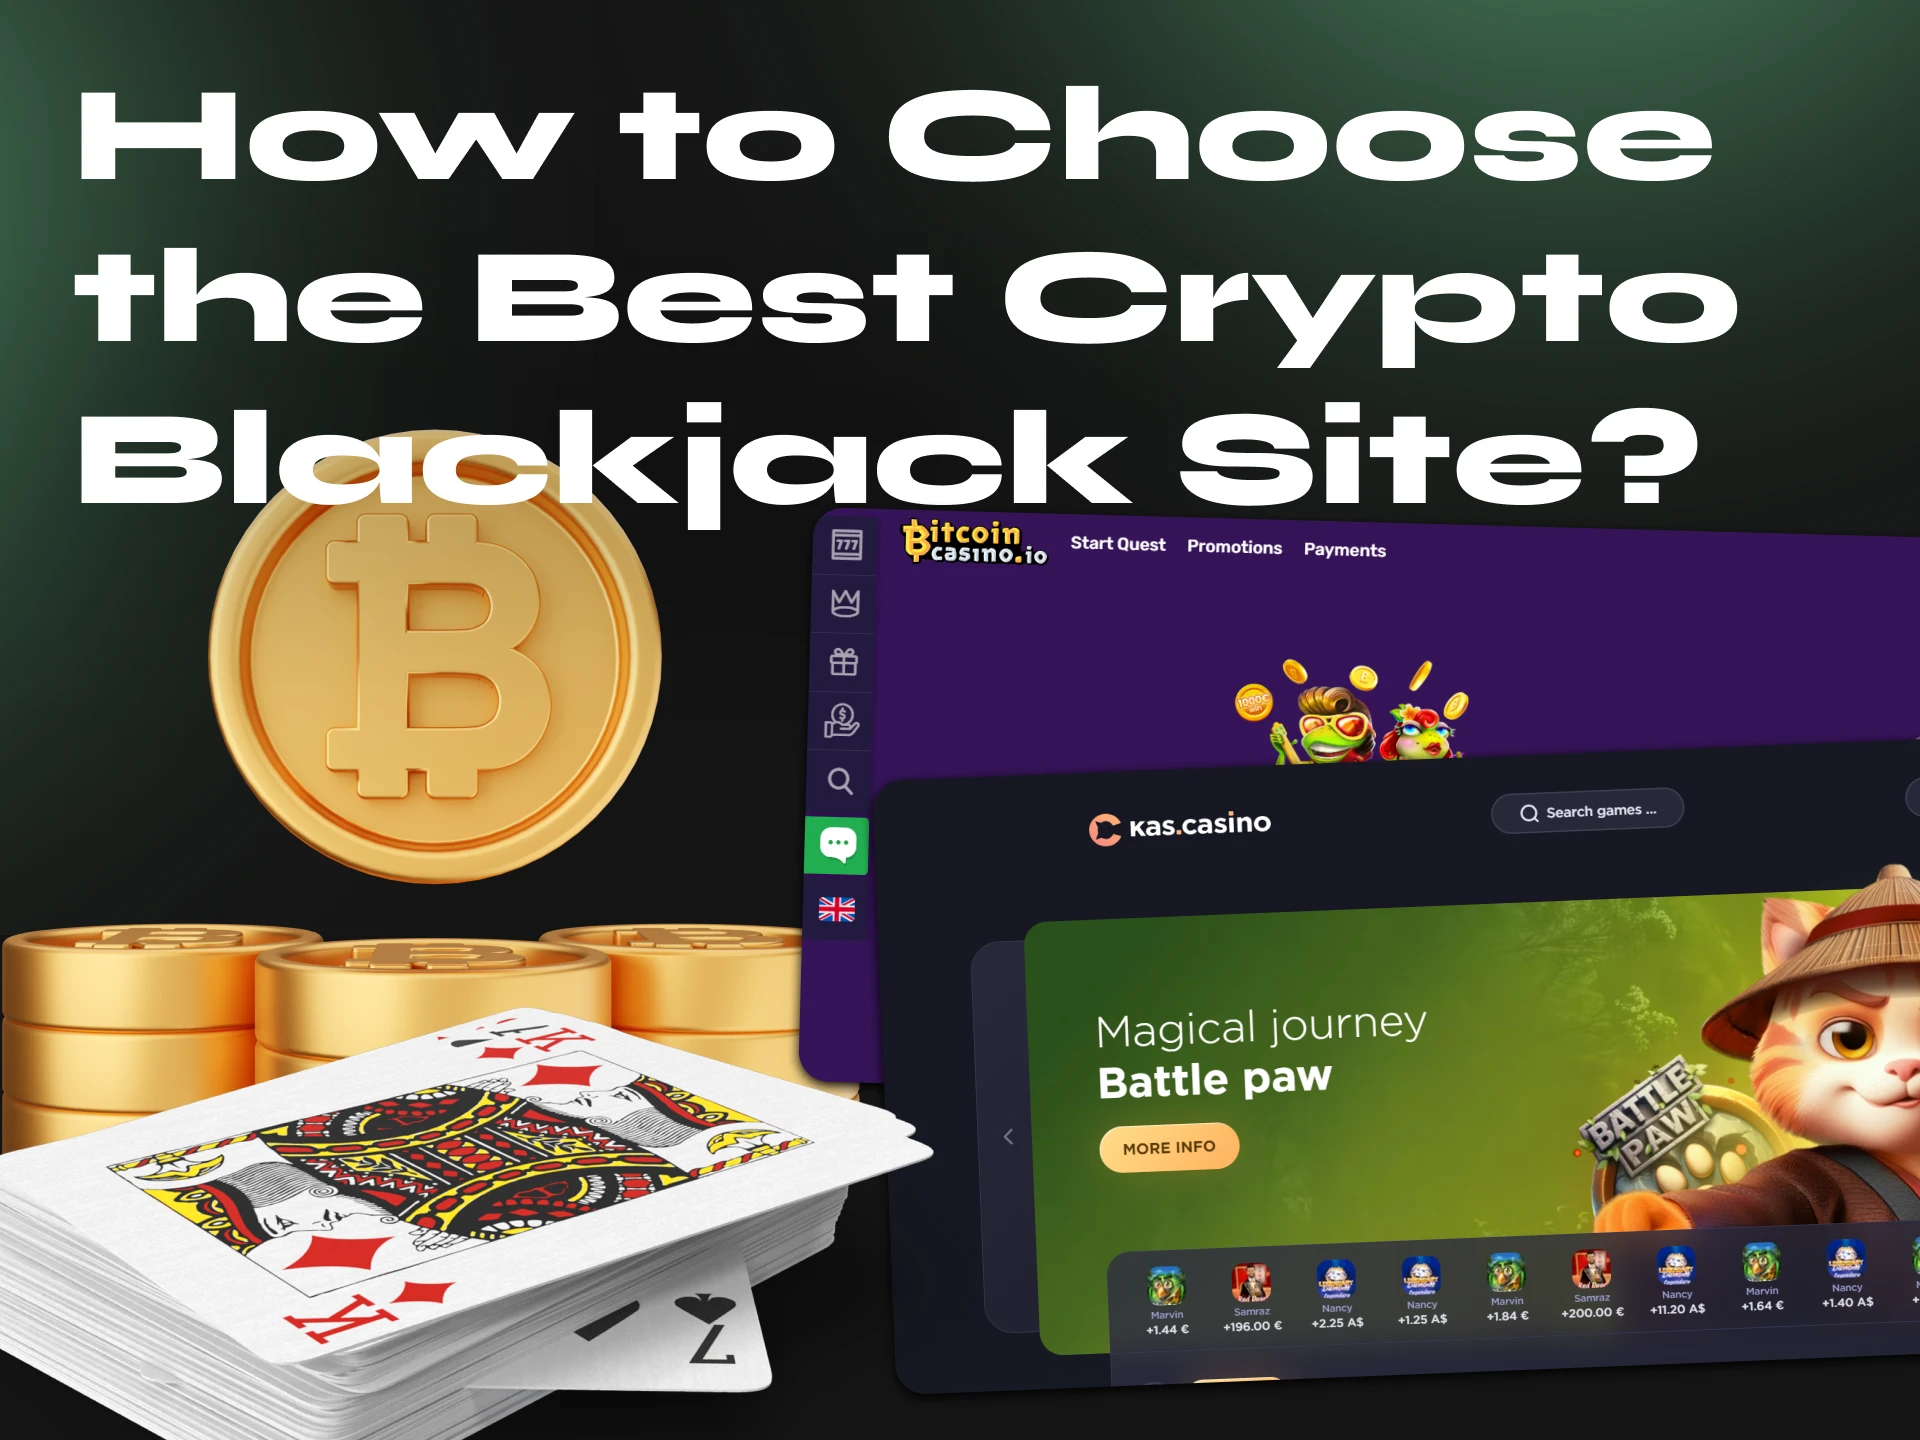 Using these tips, you will be able to choose the best crypto blackjack site.